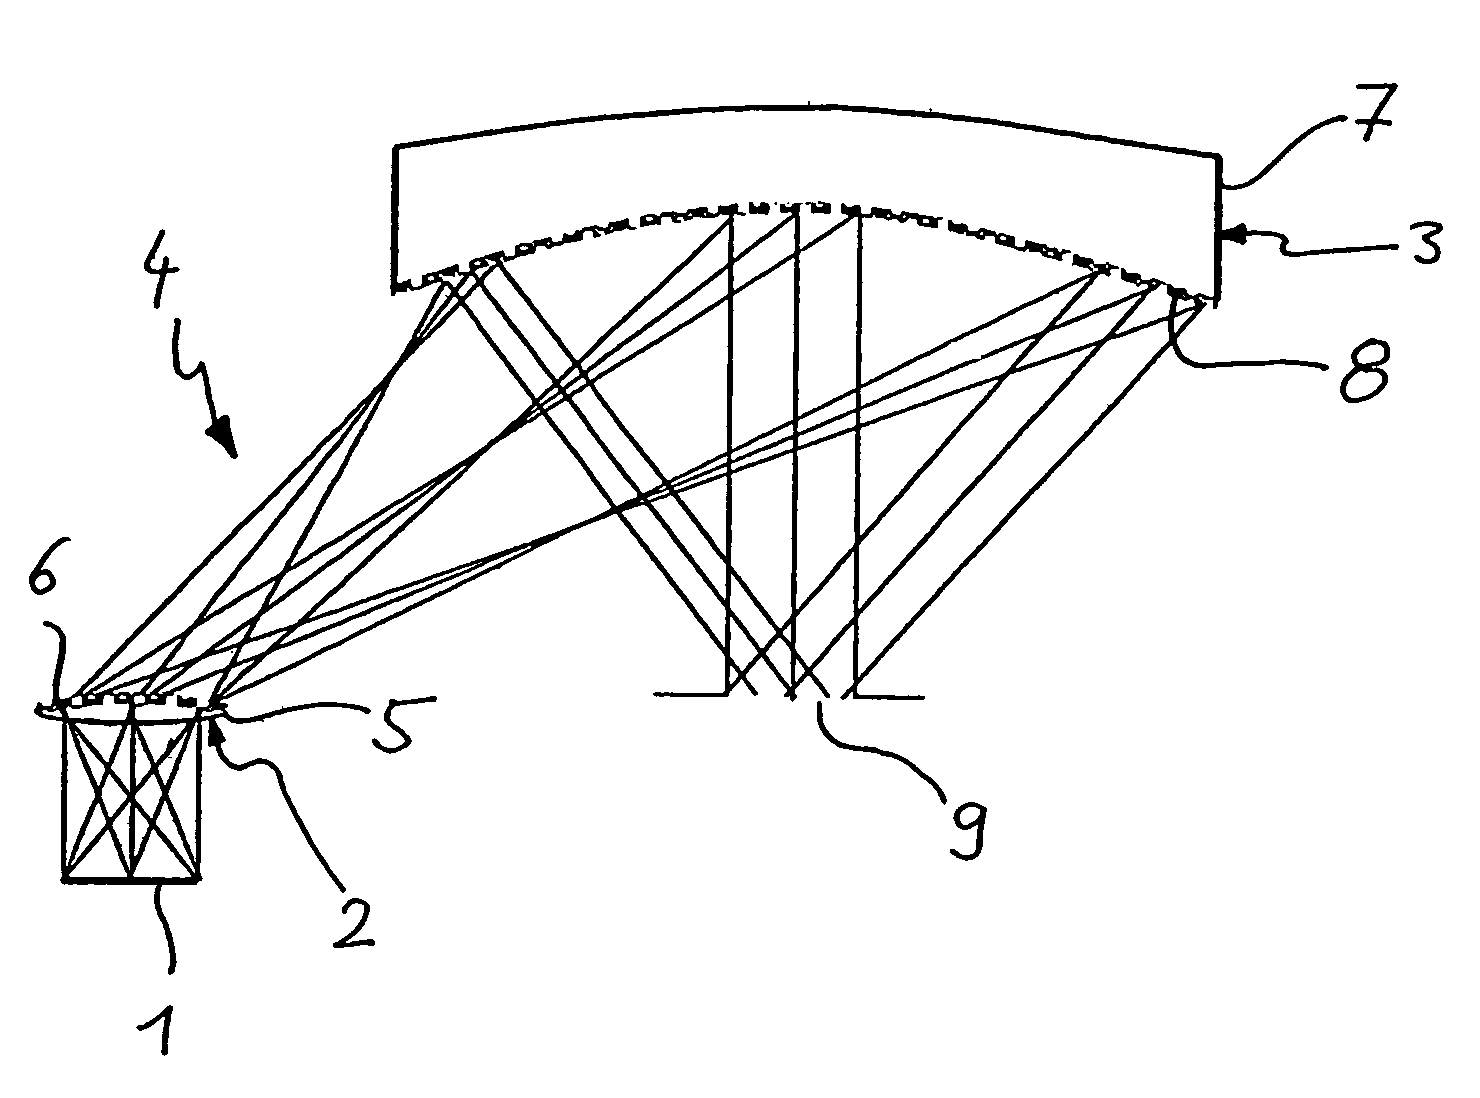 Compensating head mounted display device